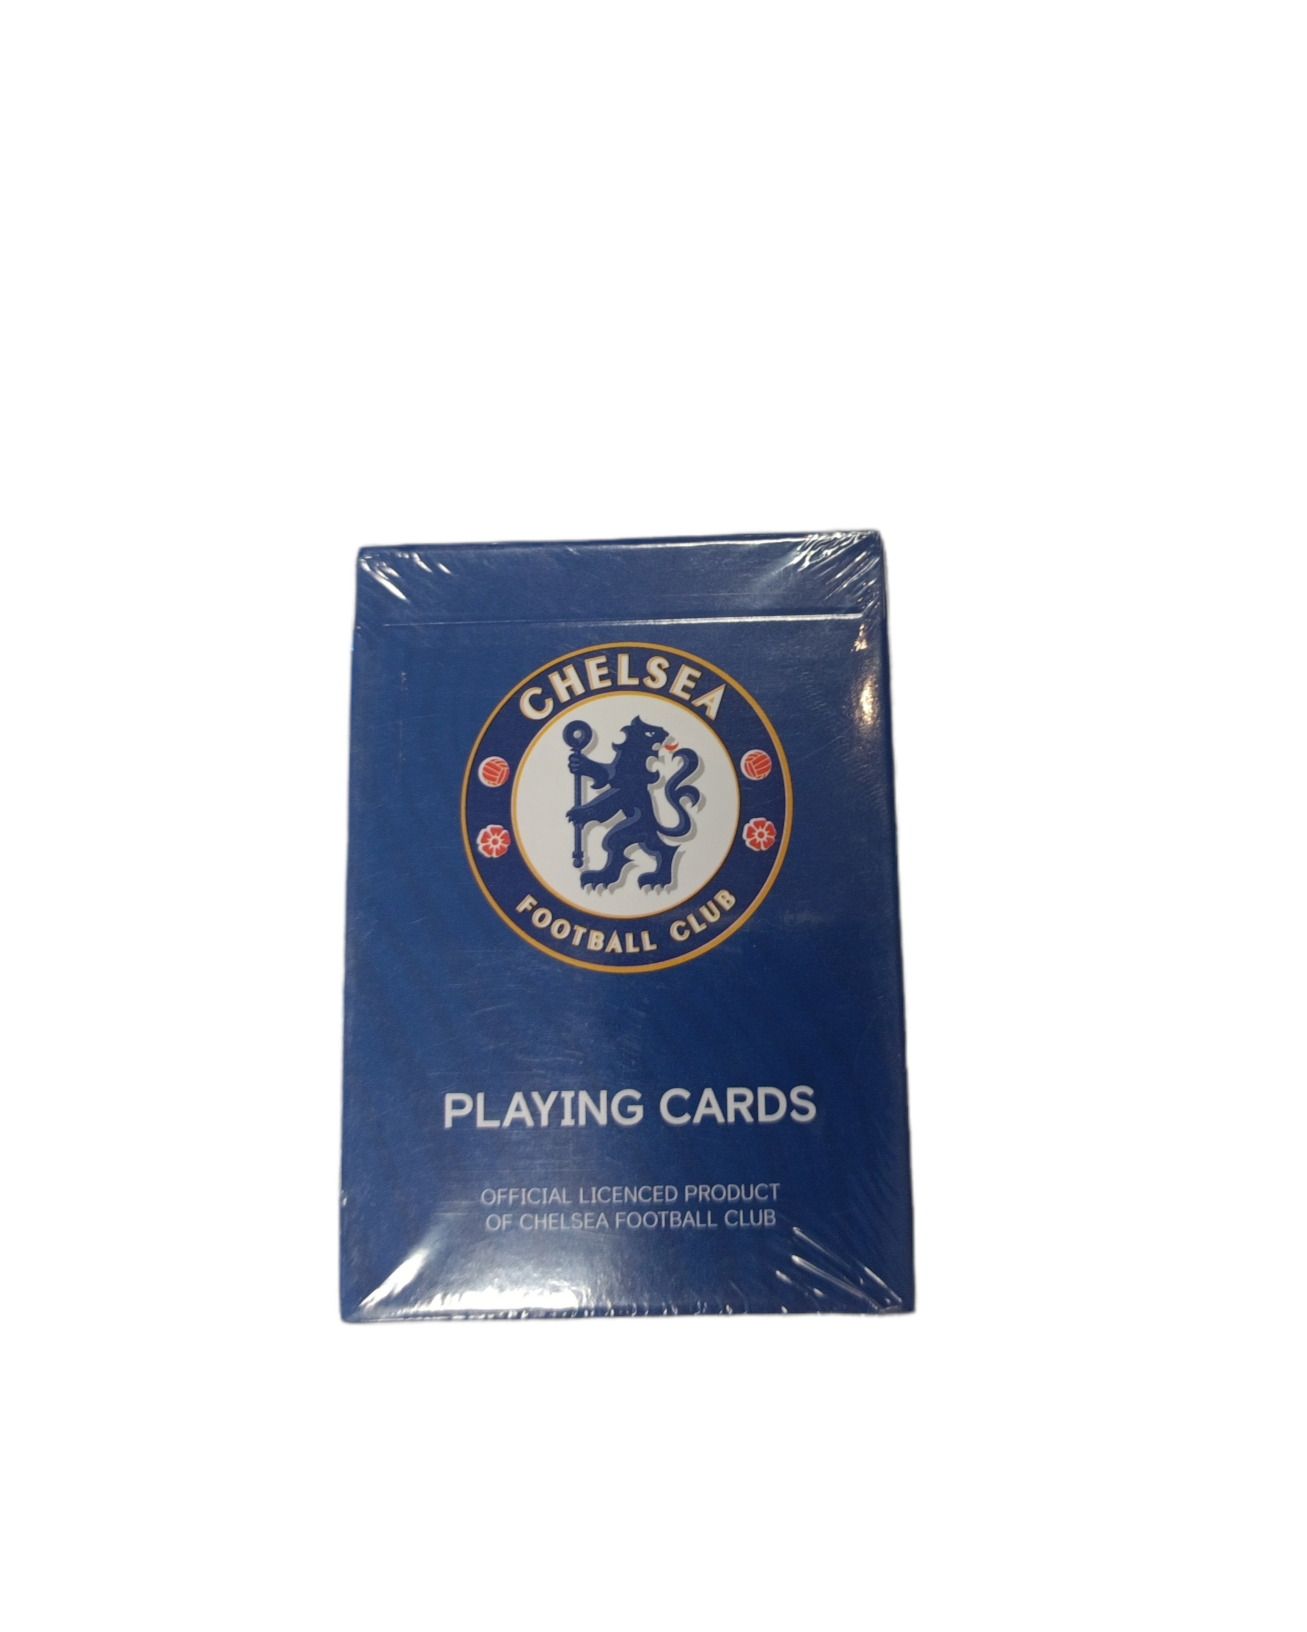 CHELSEA - PLAYING CARDS